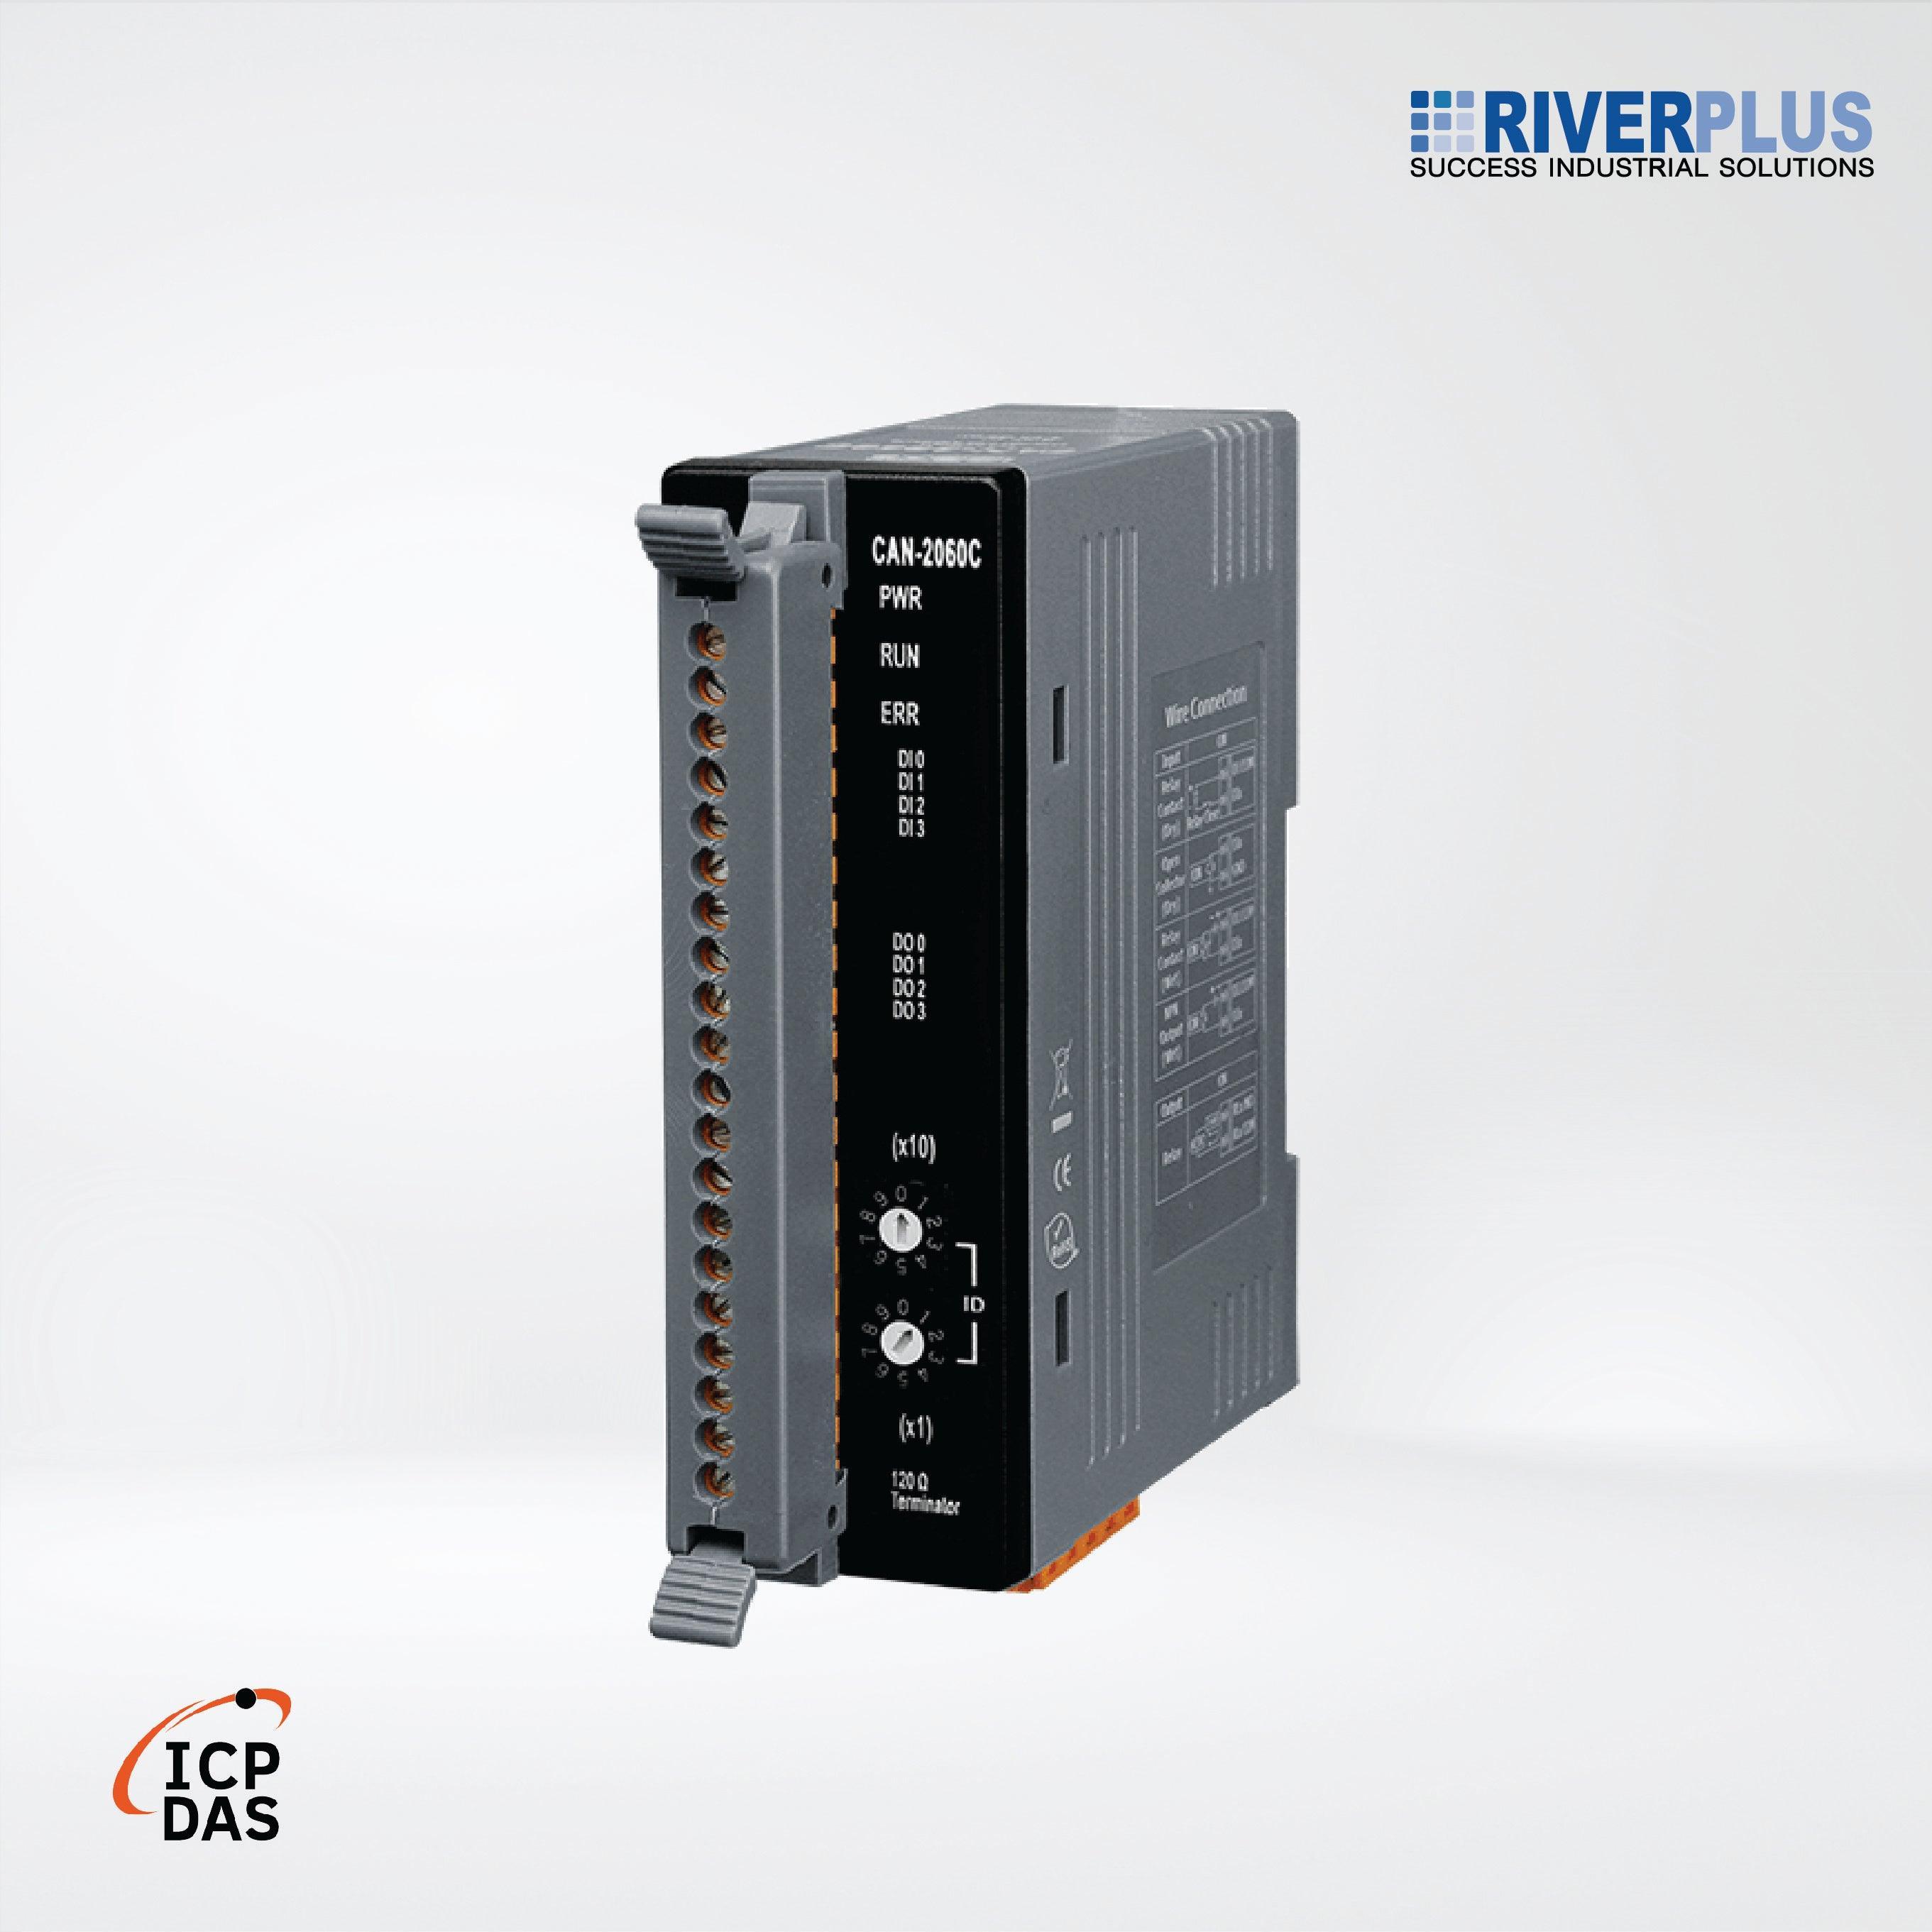 CAN-2060C CANopen Slave Module of 4-channel Isolated (Wet, Dry) DI, 4-channel Relay Output - Riverplus